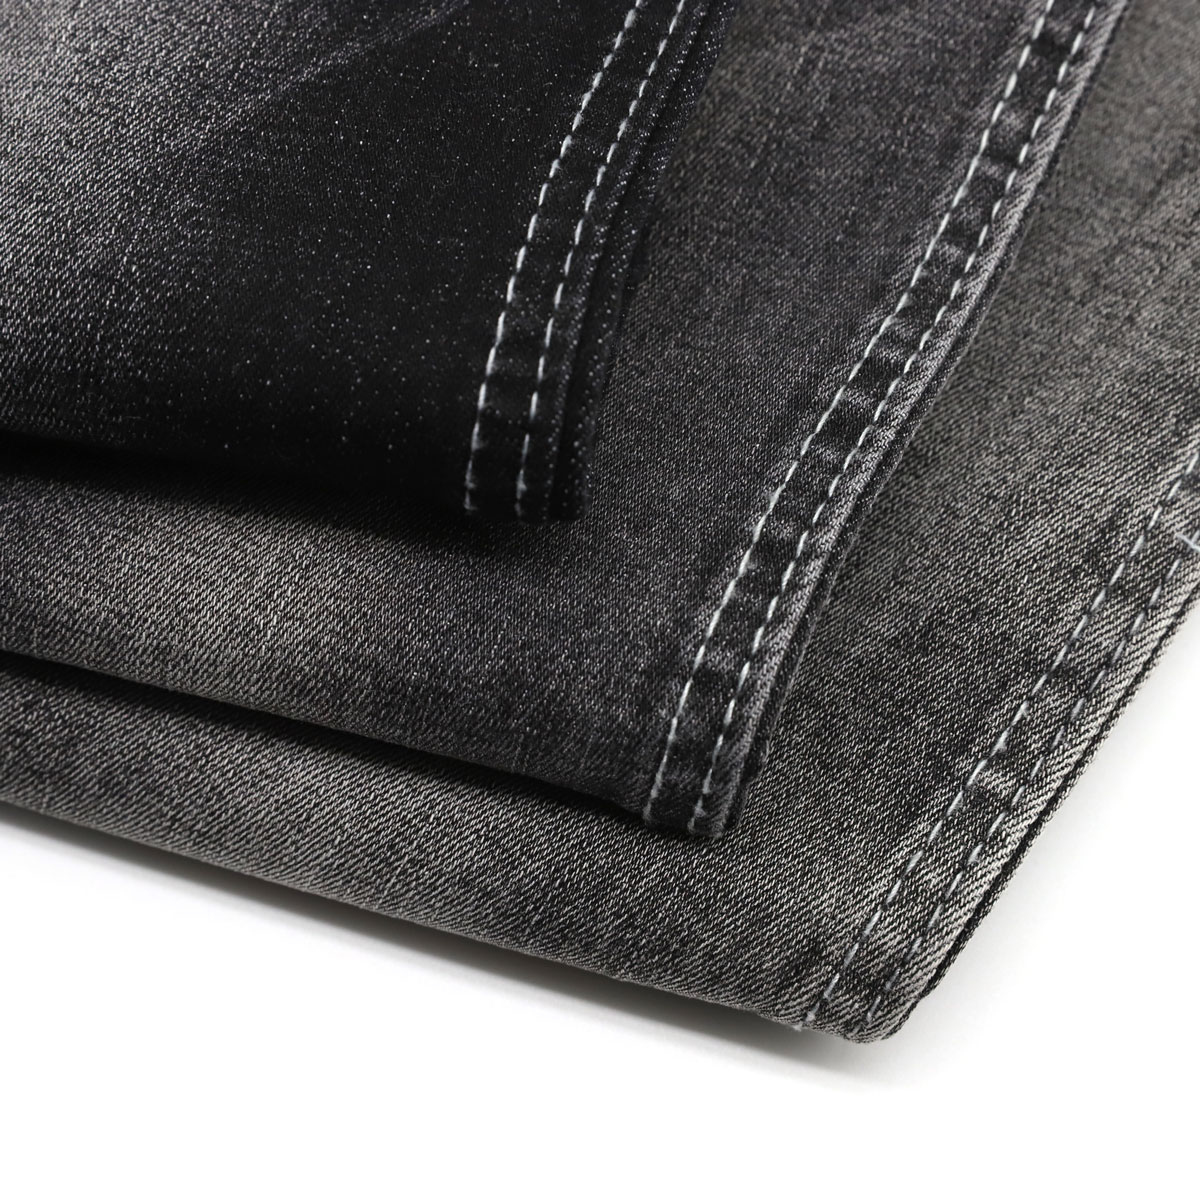 A Good Guide of Stretch Denim Fabric How to Choose 1